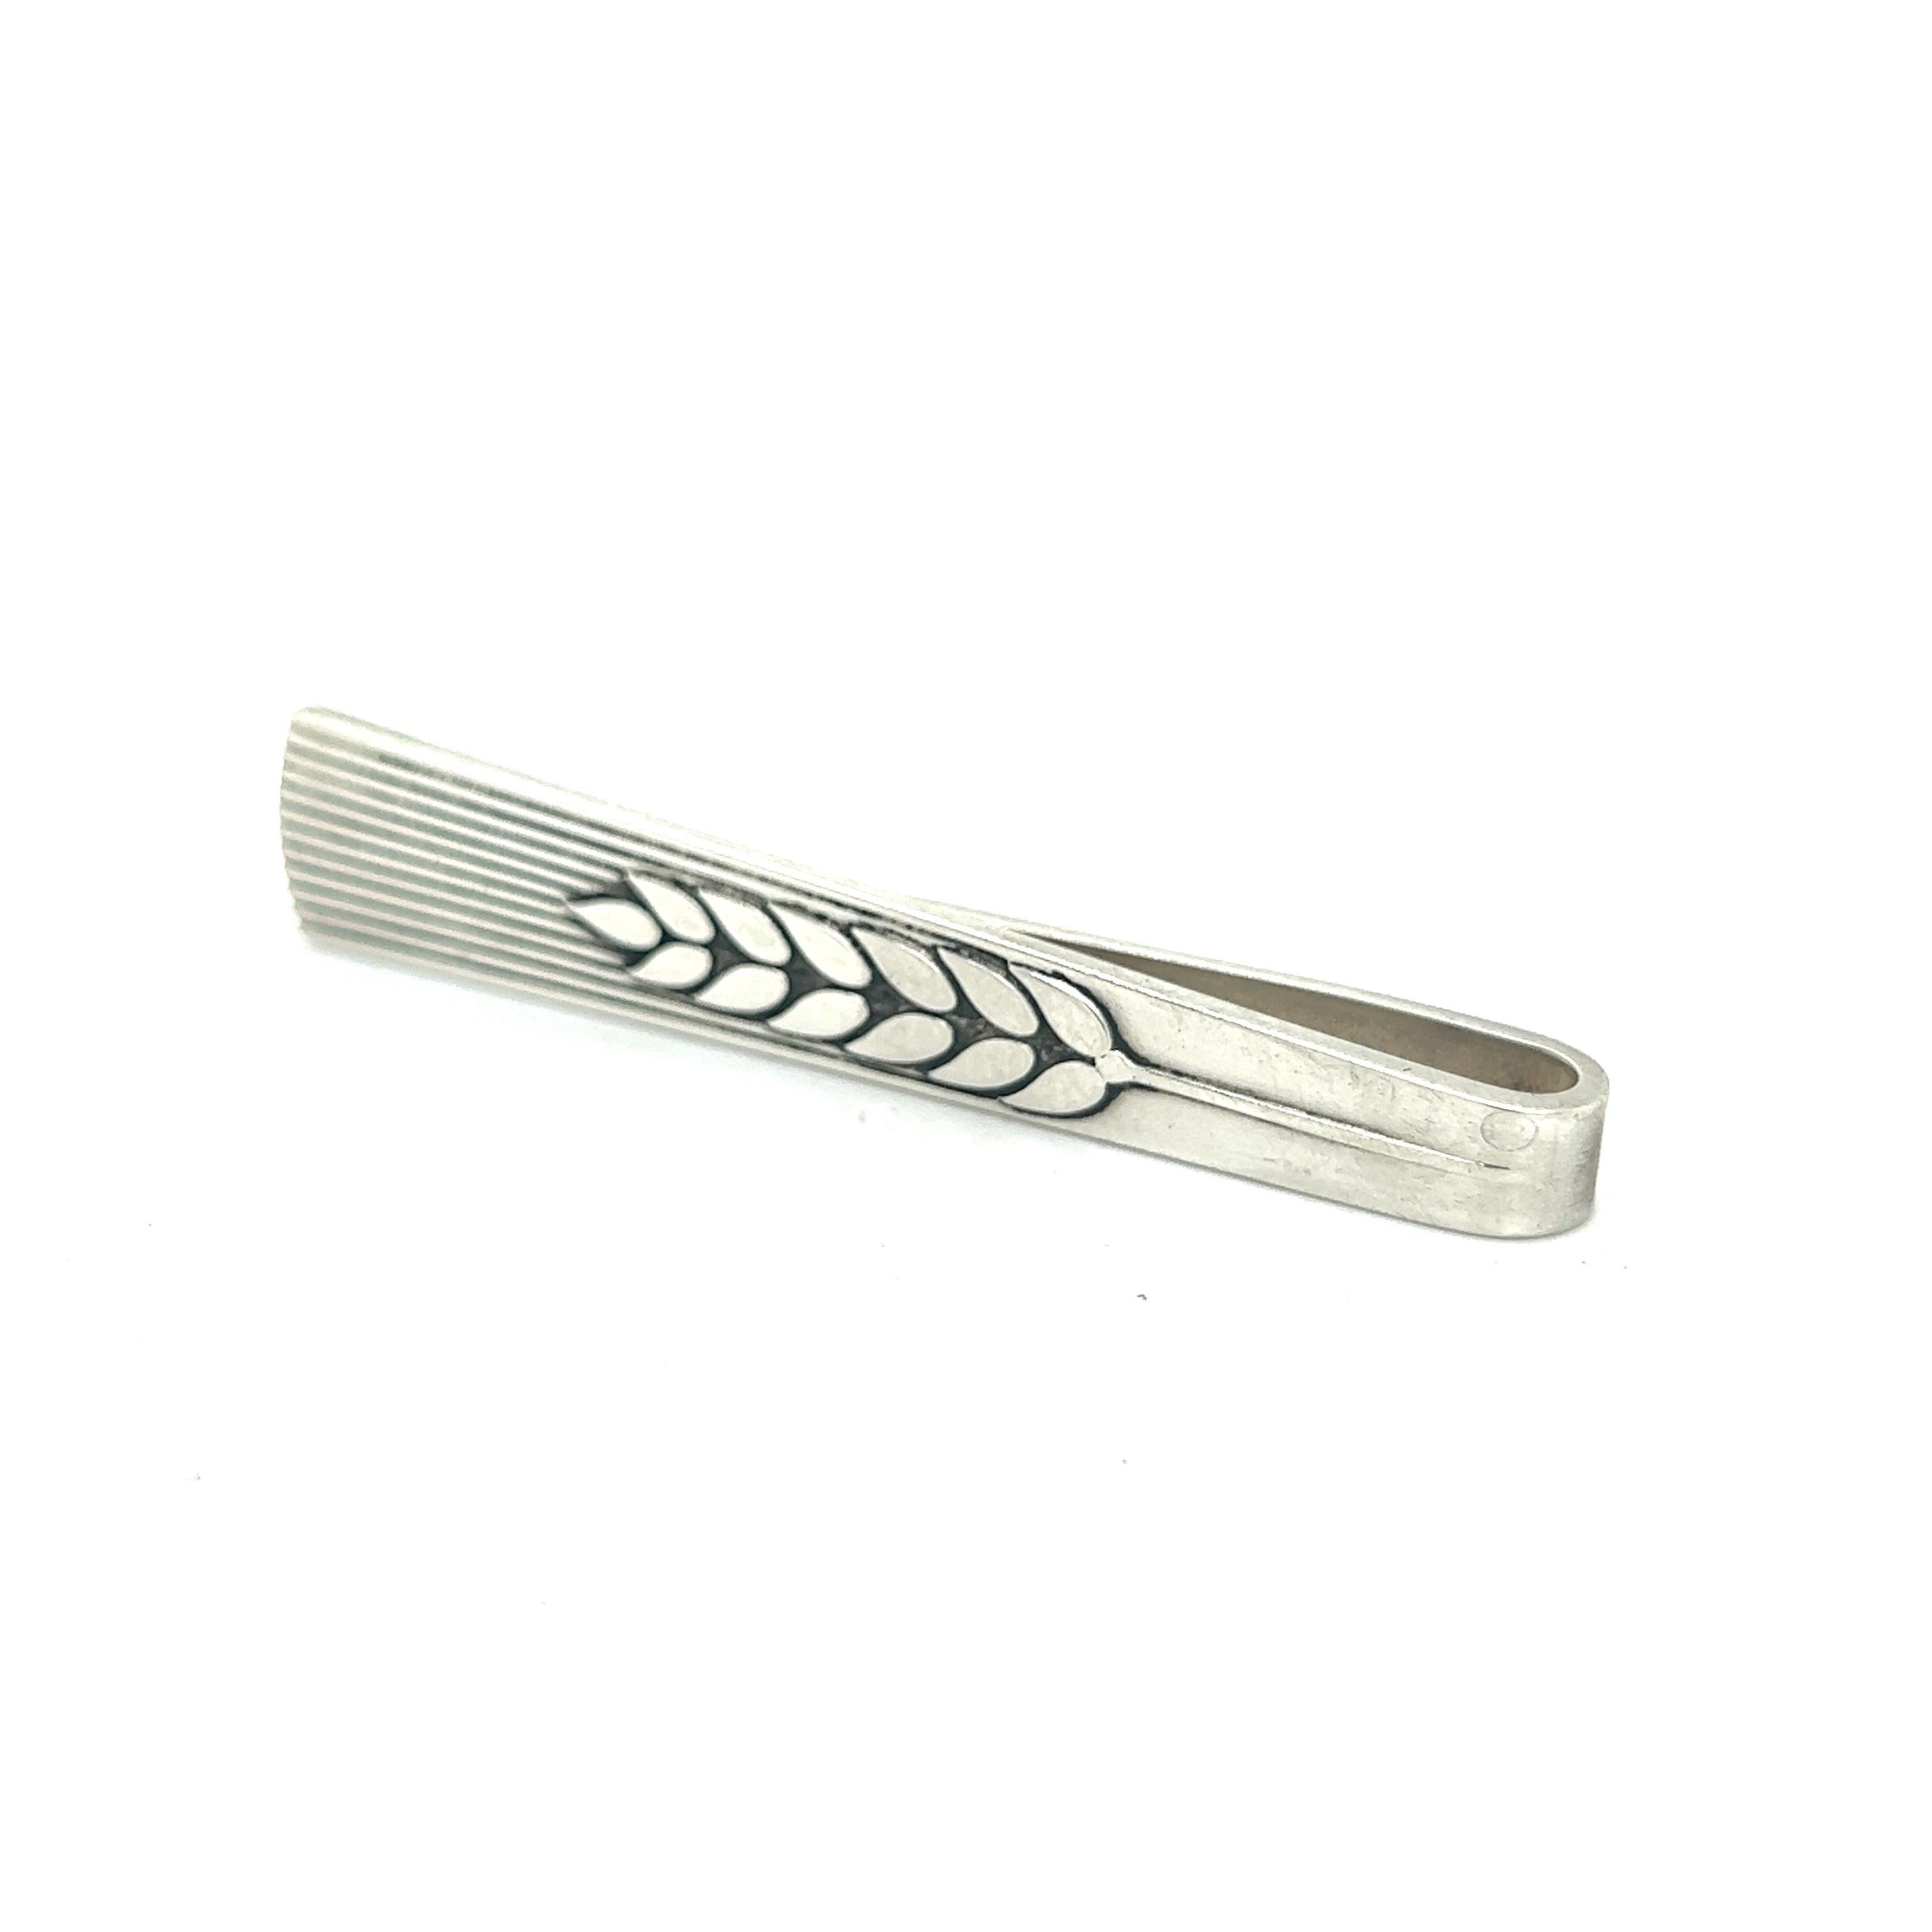 Authentic Georg Jensen Estate Money Clip Tie Bar Silver GJ15

This elegant Authentic Georg Jensen Men's Money Clip Tie Bar is made of sterling silver and has a weight of 11.09 grams.

TRUSTED SELLER SINCE 2002

PLEASE SEE OUR HUNDREDS OF POSITIVE